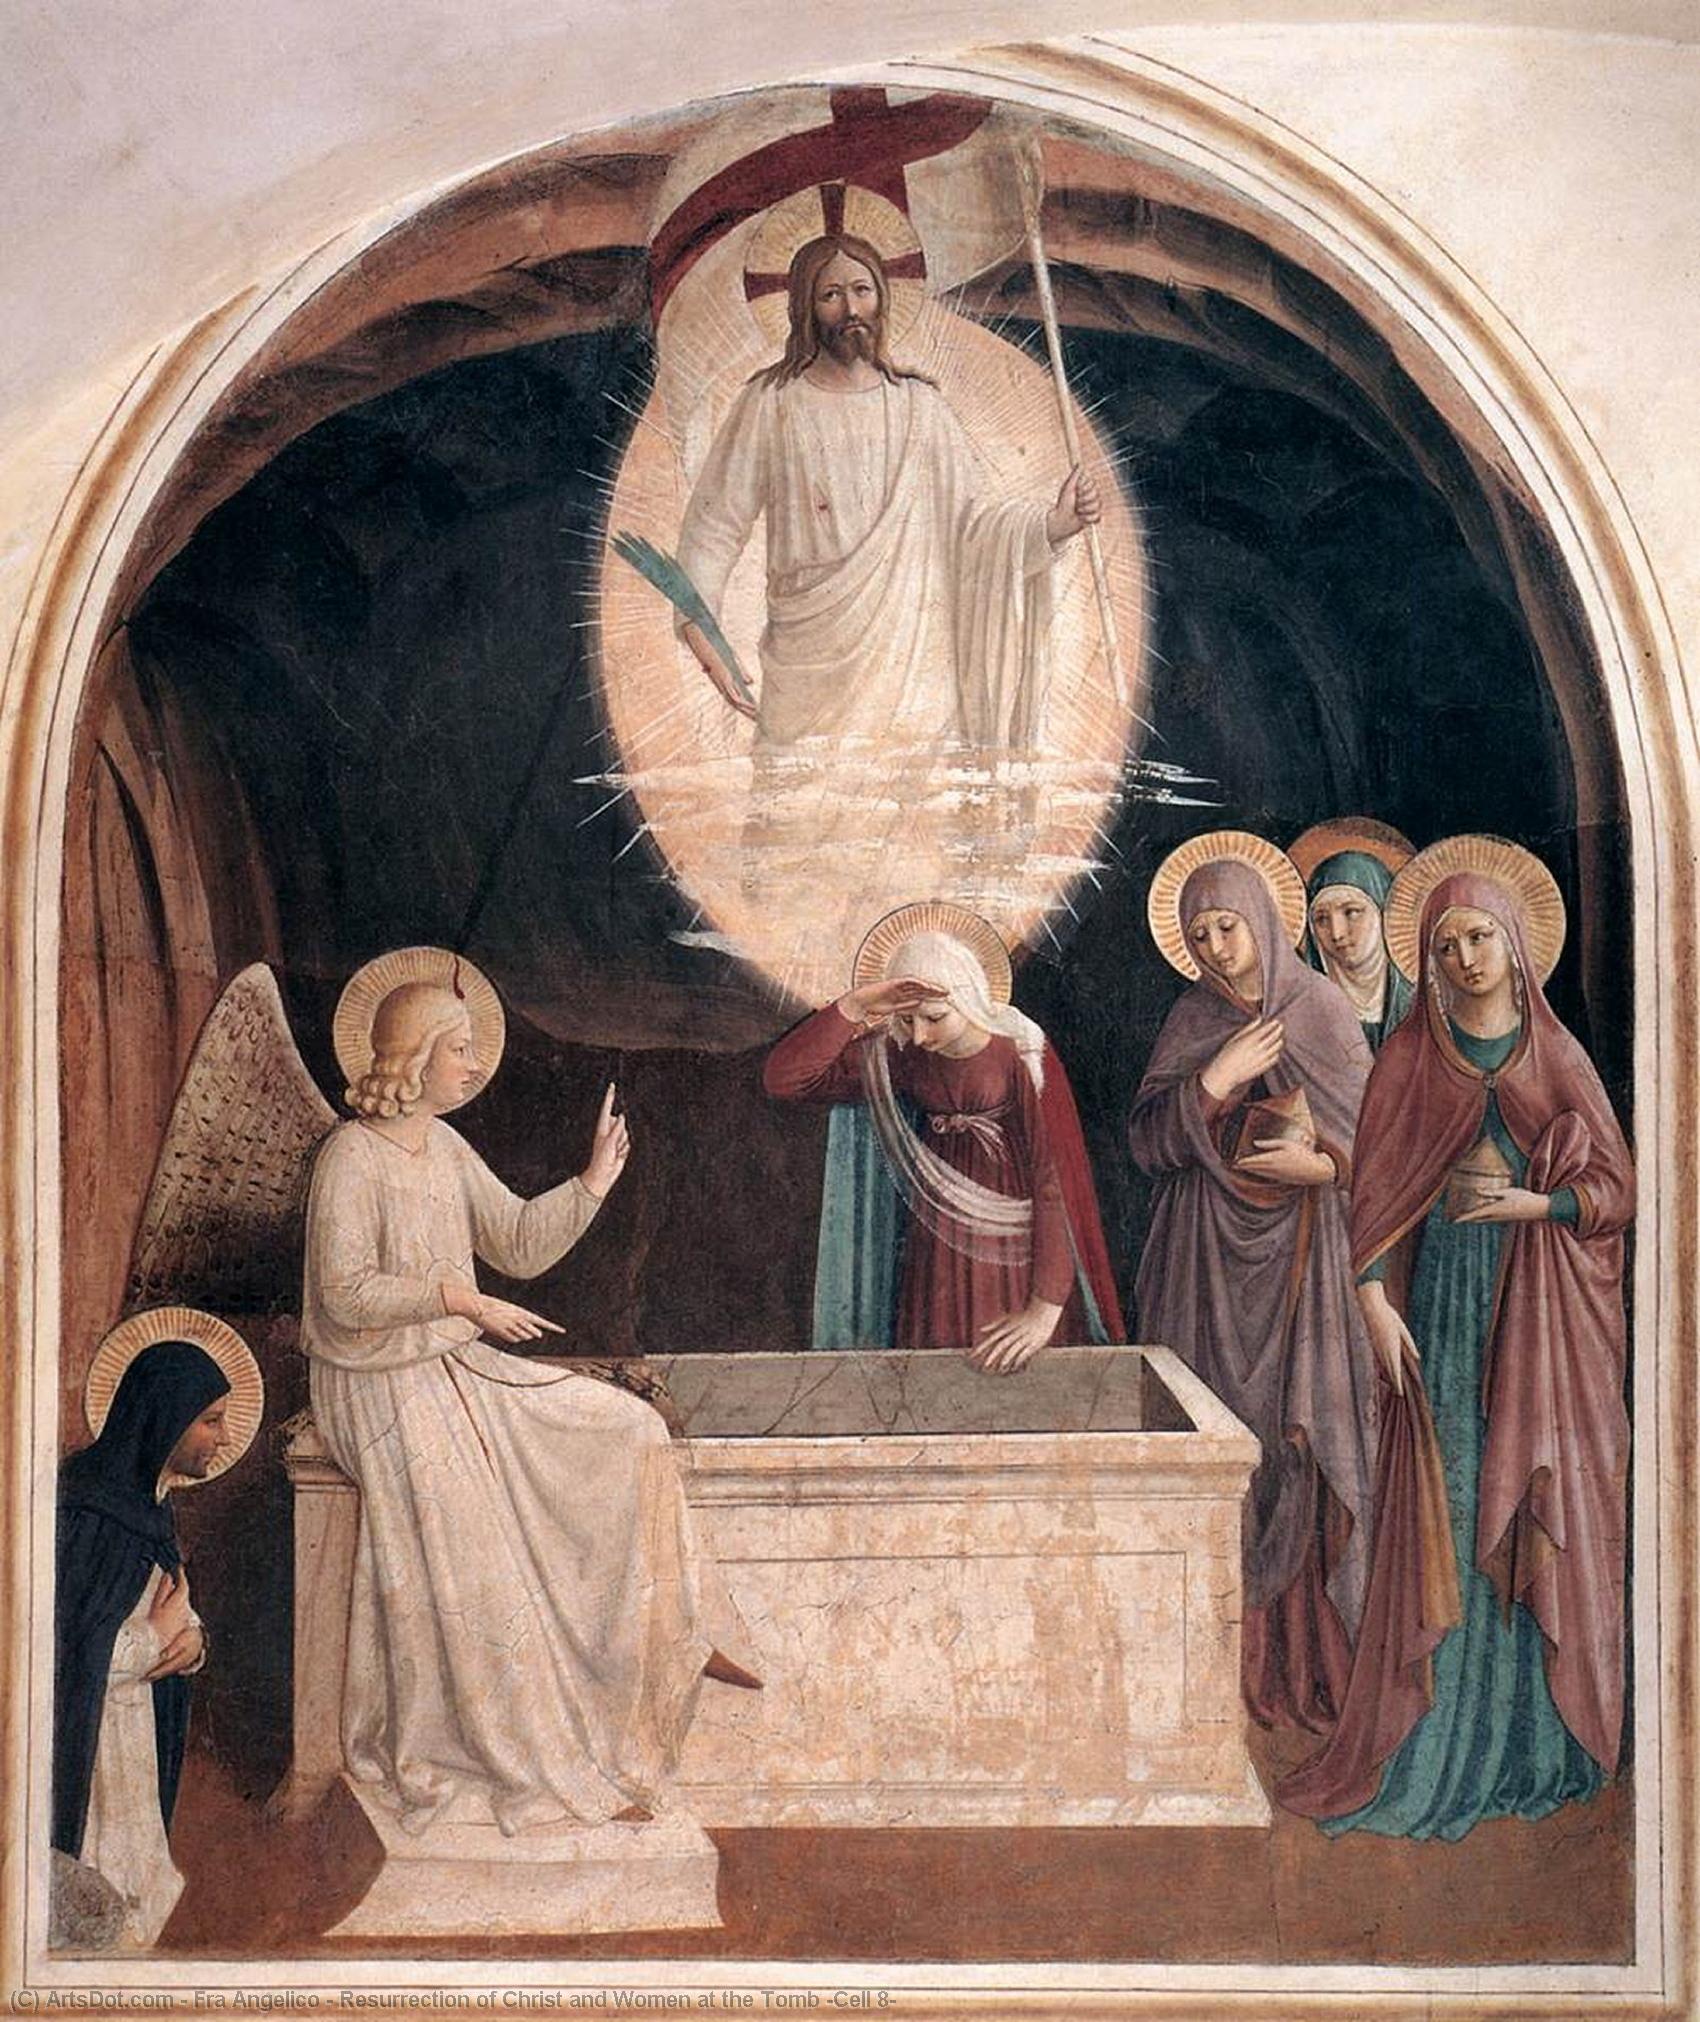 WikiOO.org - Encyclopedia of Fine Arts - Lukisan, Artwork Fra Angelico - Resurrection of Christ and Women at the Tomb (Cell 8)